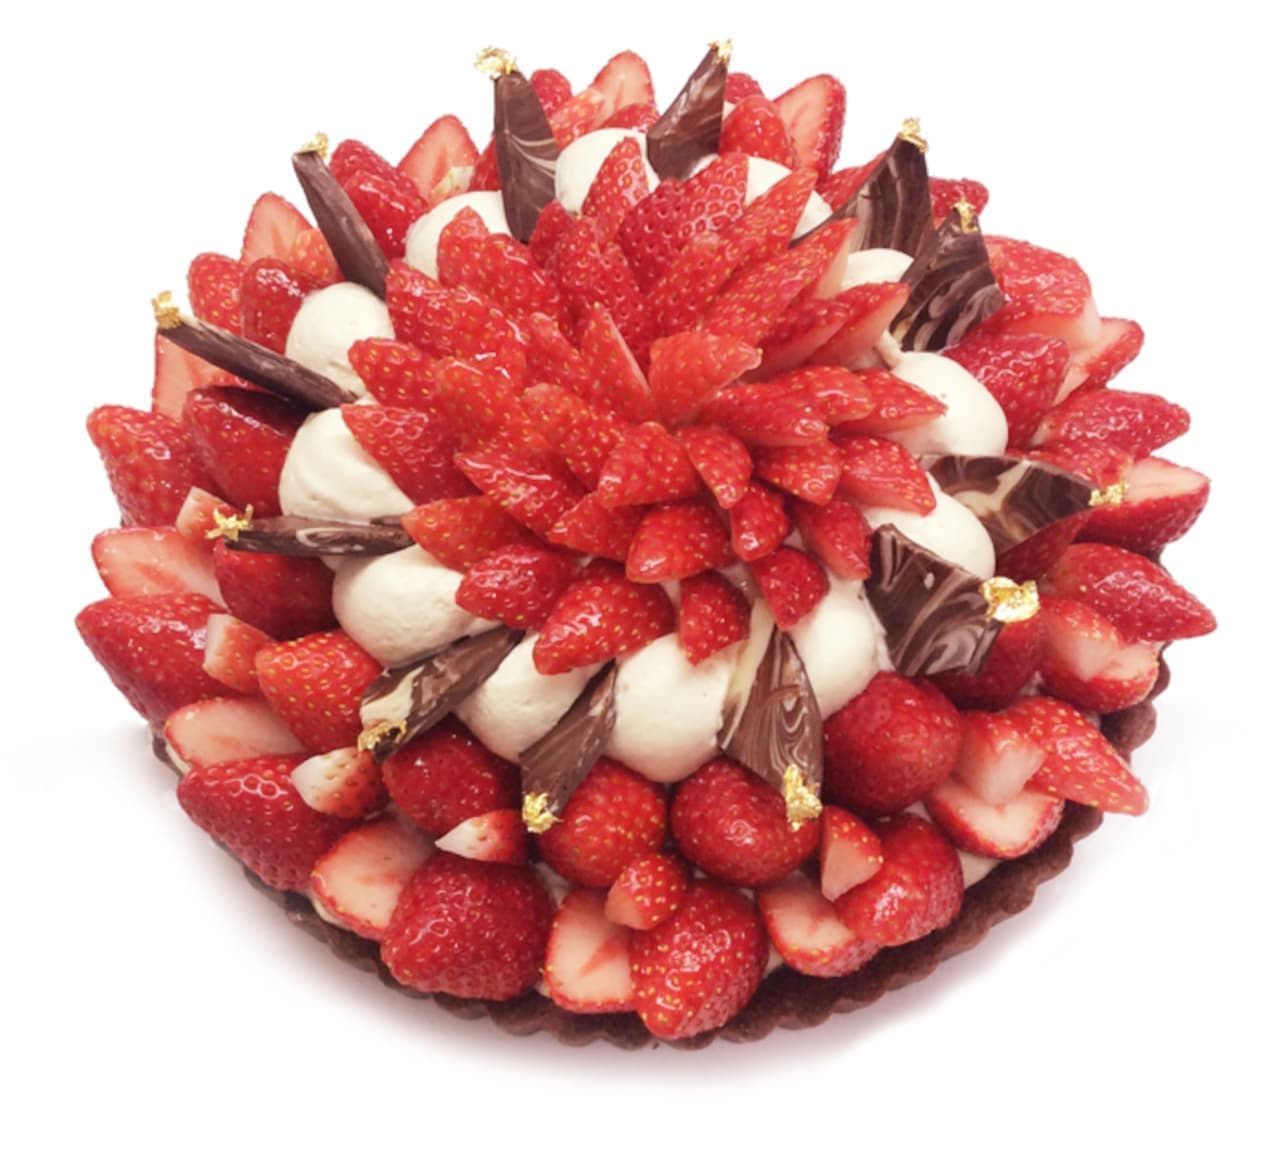 Cafe Comsa January 15 "Strawberry Day" Sweets